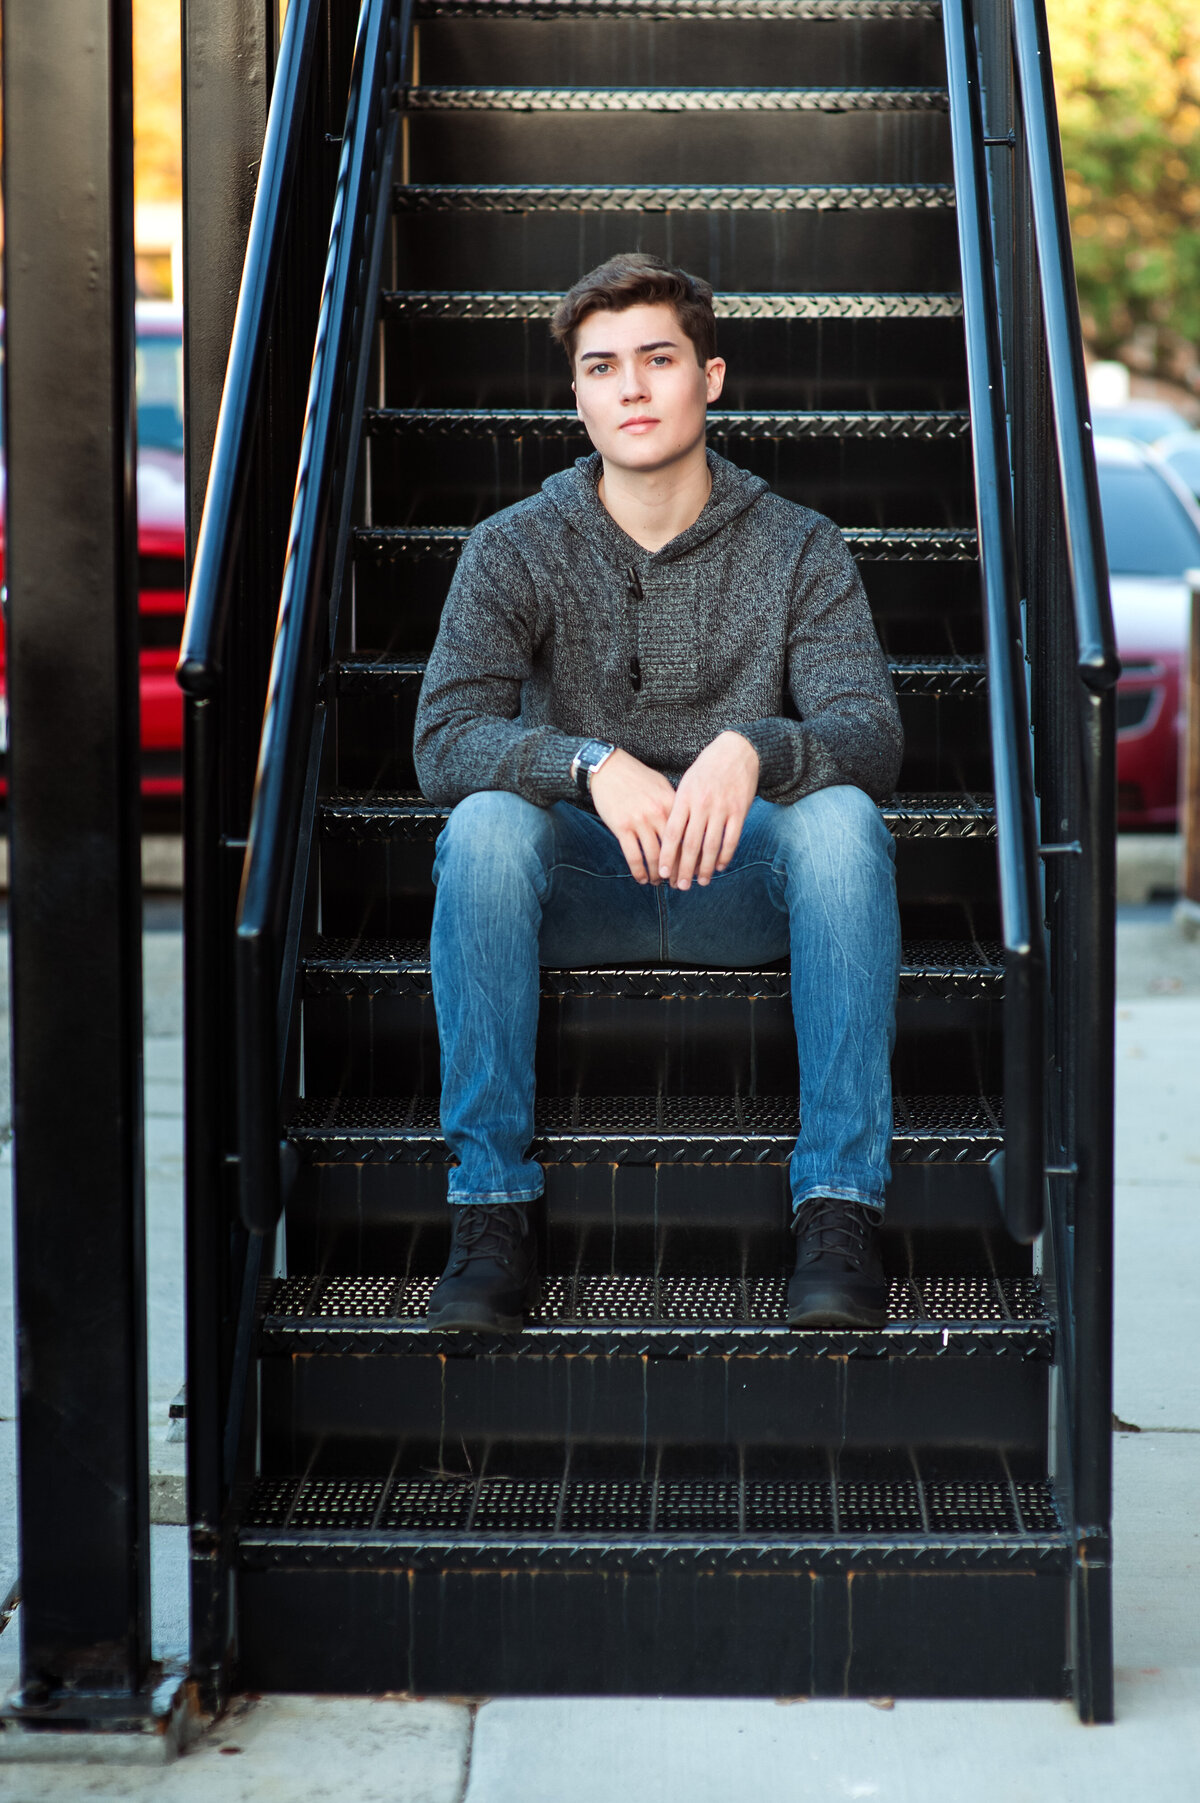 Senior Guy Fall Session in Downtown Decatur